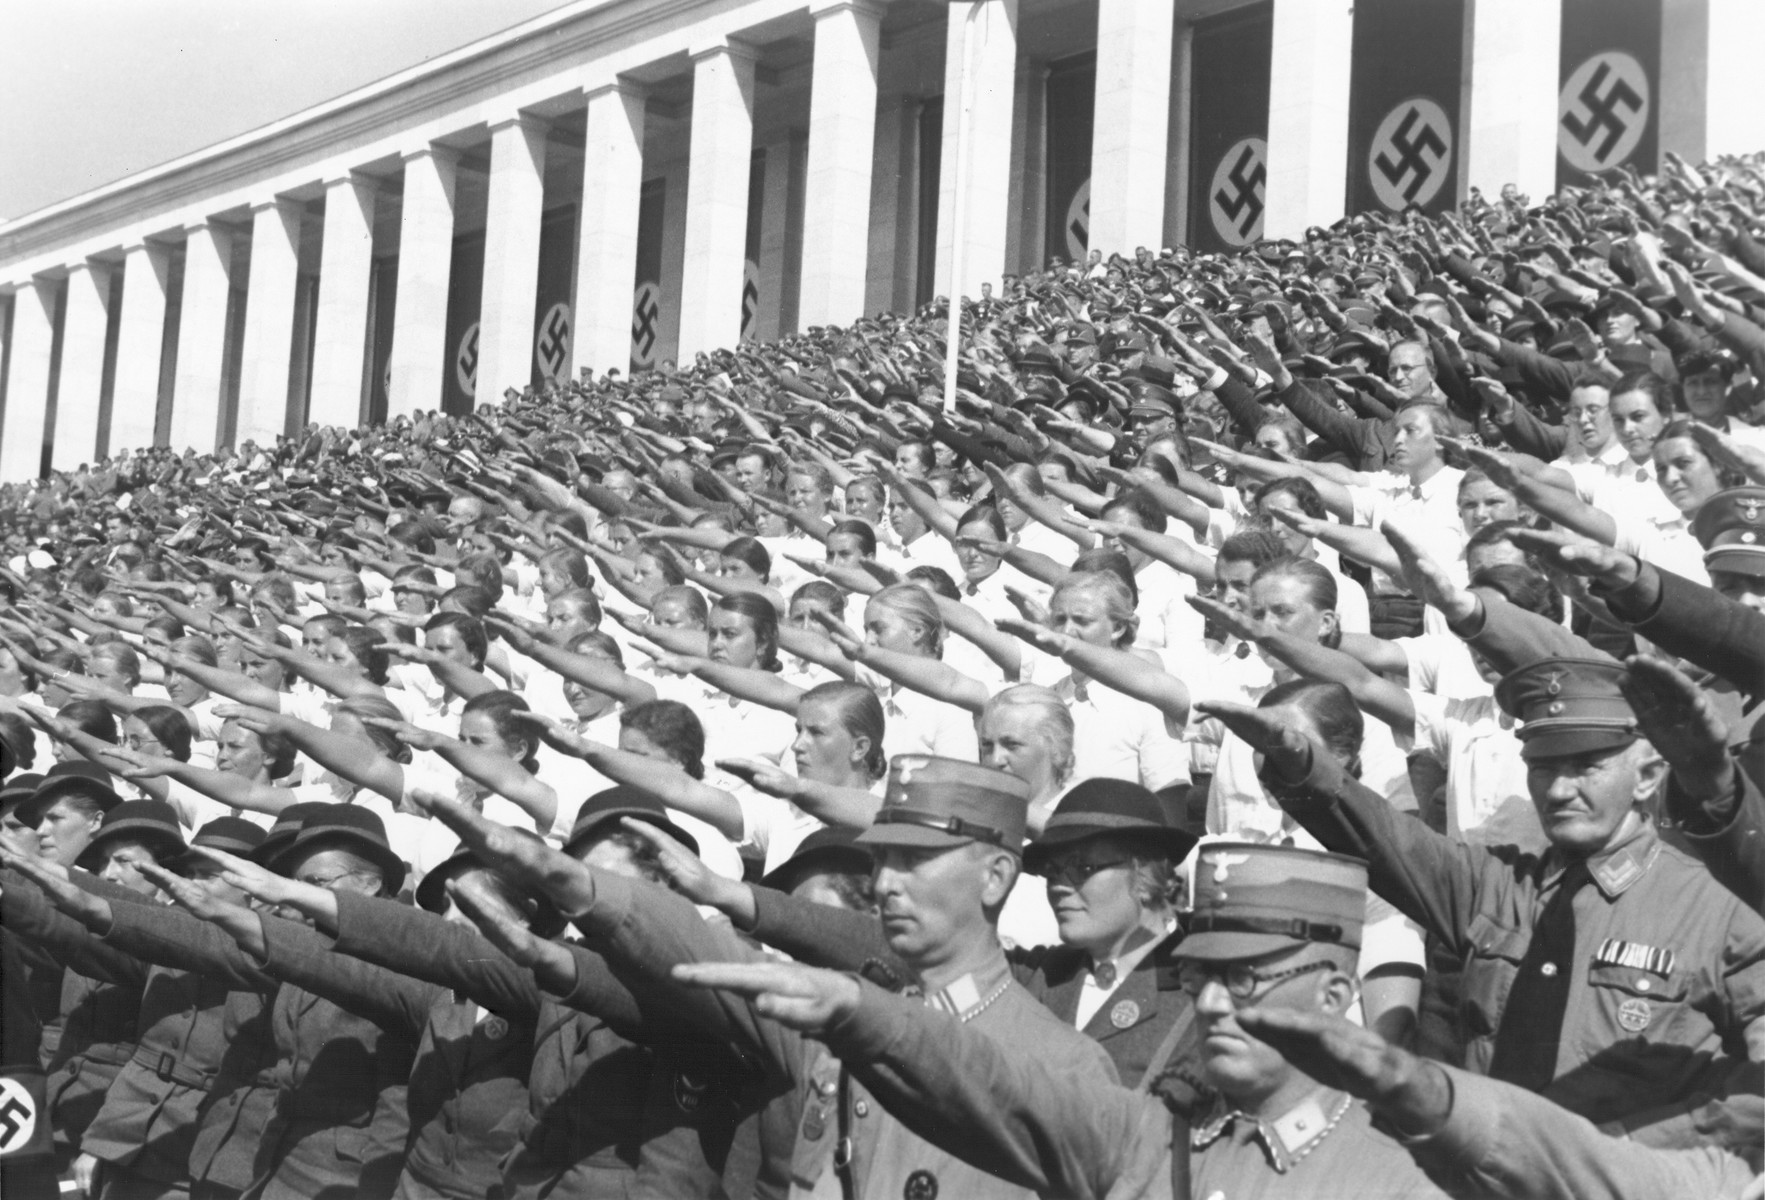 German spectators at the 1937 Reichsparteitag (Reich Party Day) celebrations in Nuremberg raise their arms in the Nazi salute.